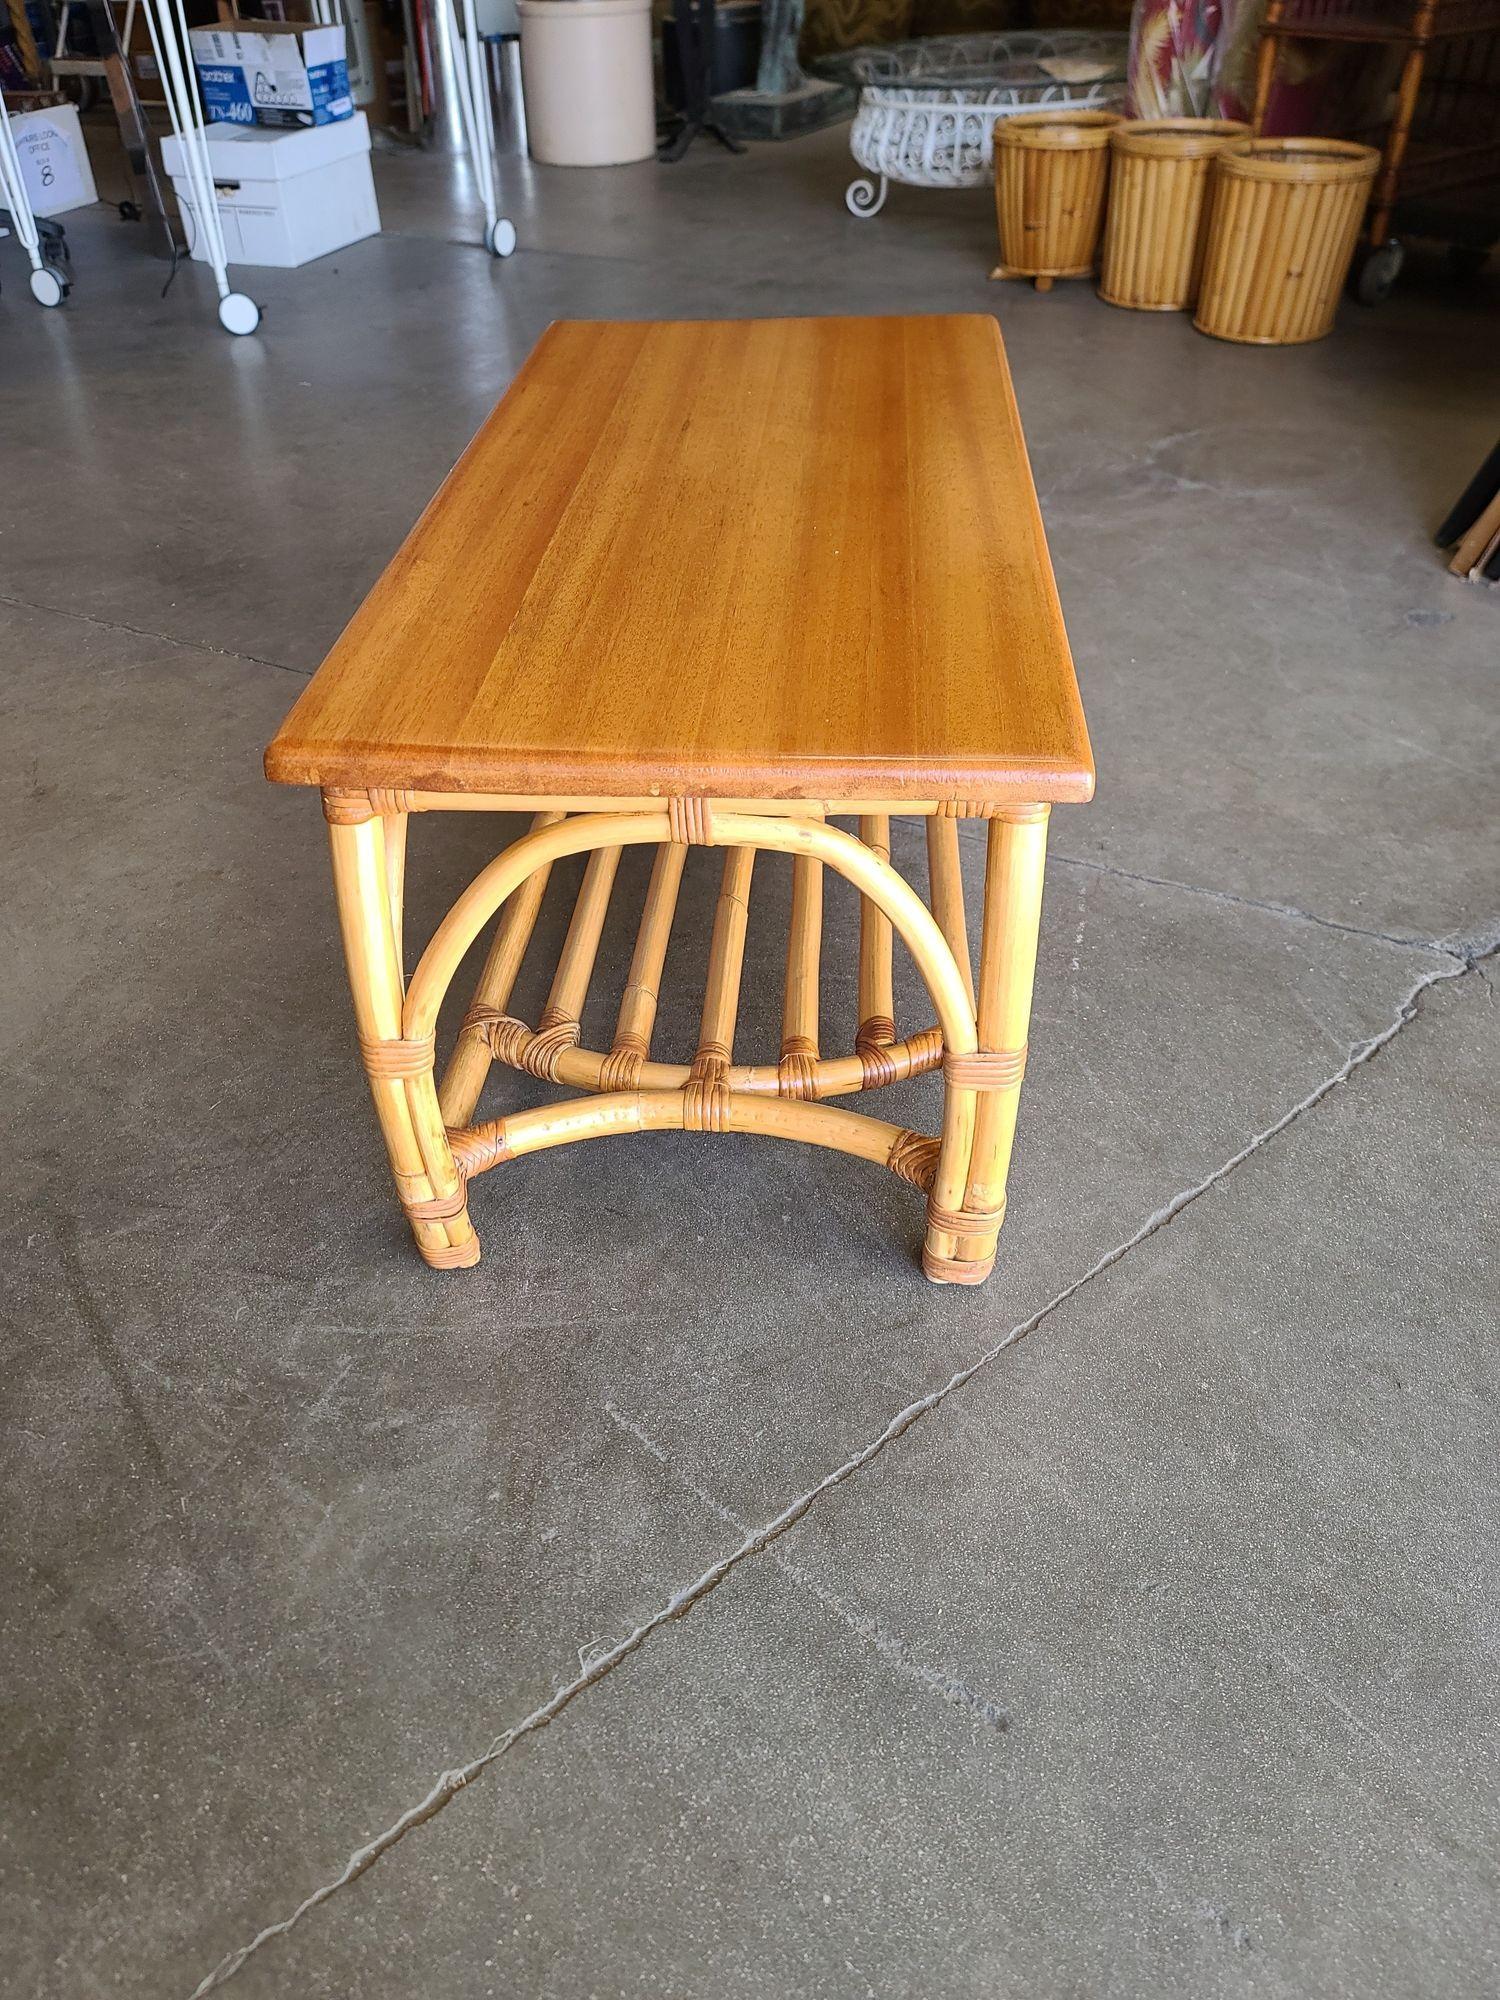 Restored Two-Tier Rattan Coffee Table with Mahogany Top & Pole Bottom In Excellent Condition For Sale In Van Nuys, CA